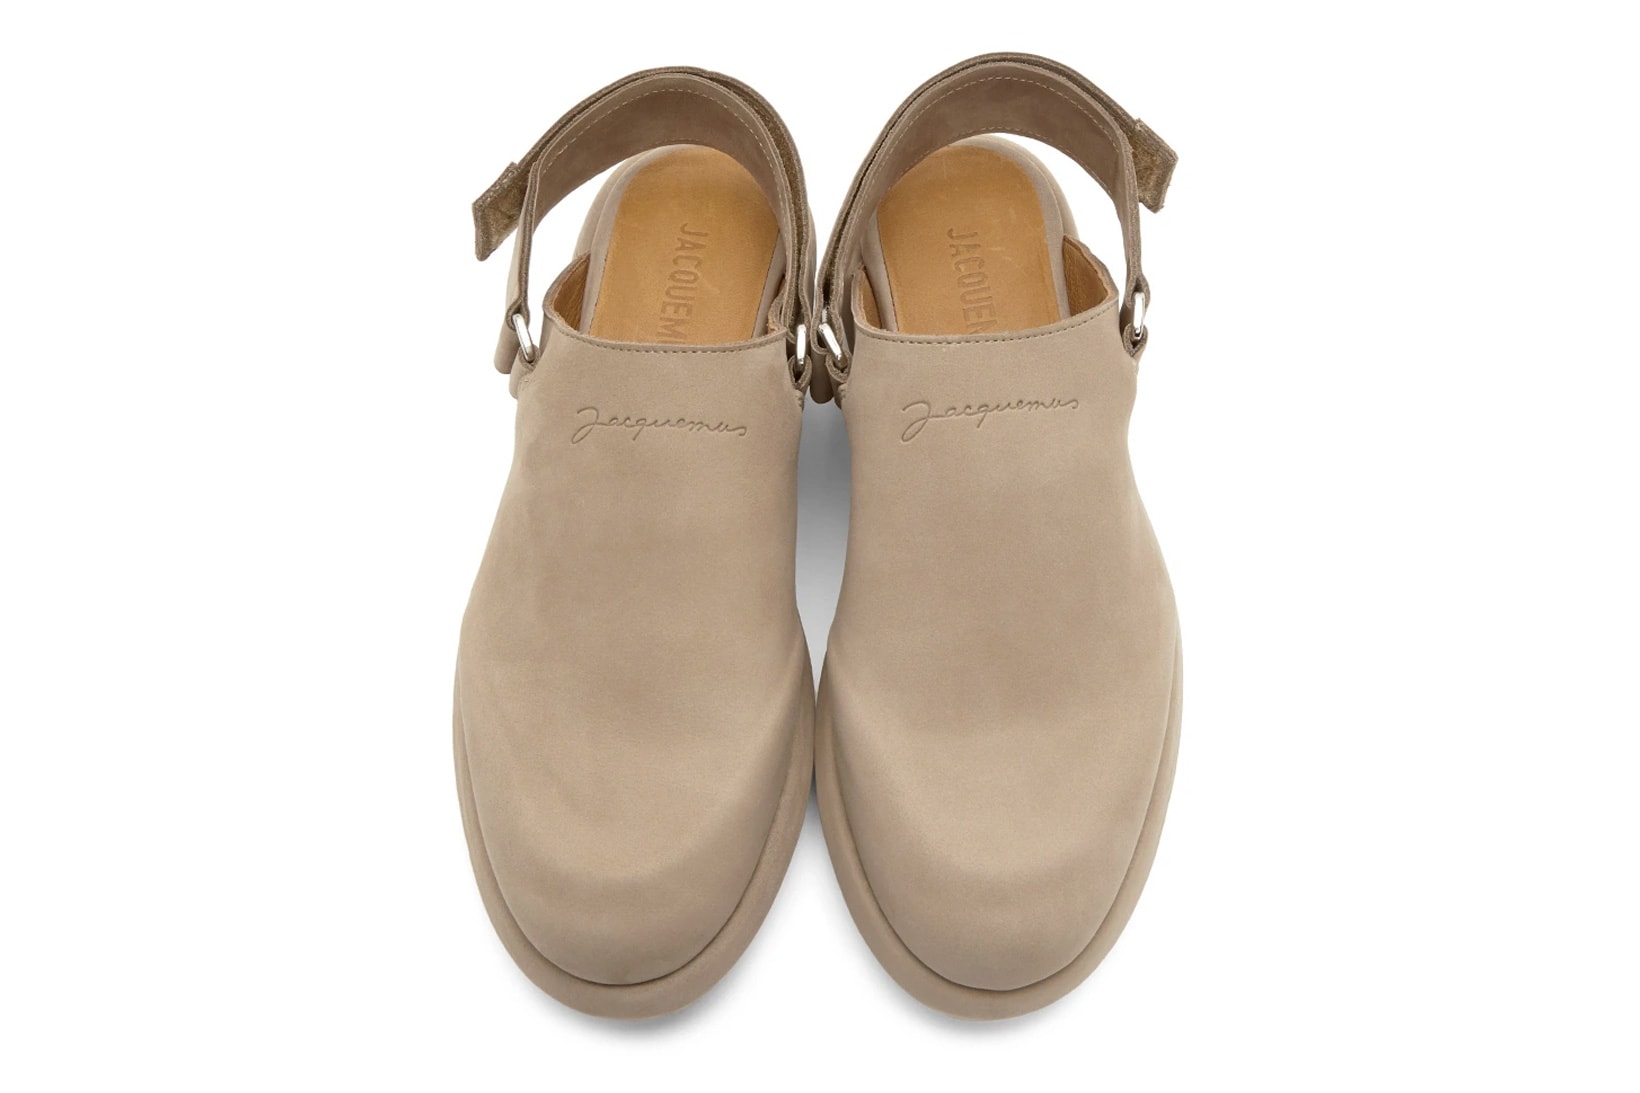 jacquemus les mules slippers shoes pink taupe fall winter release